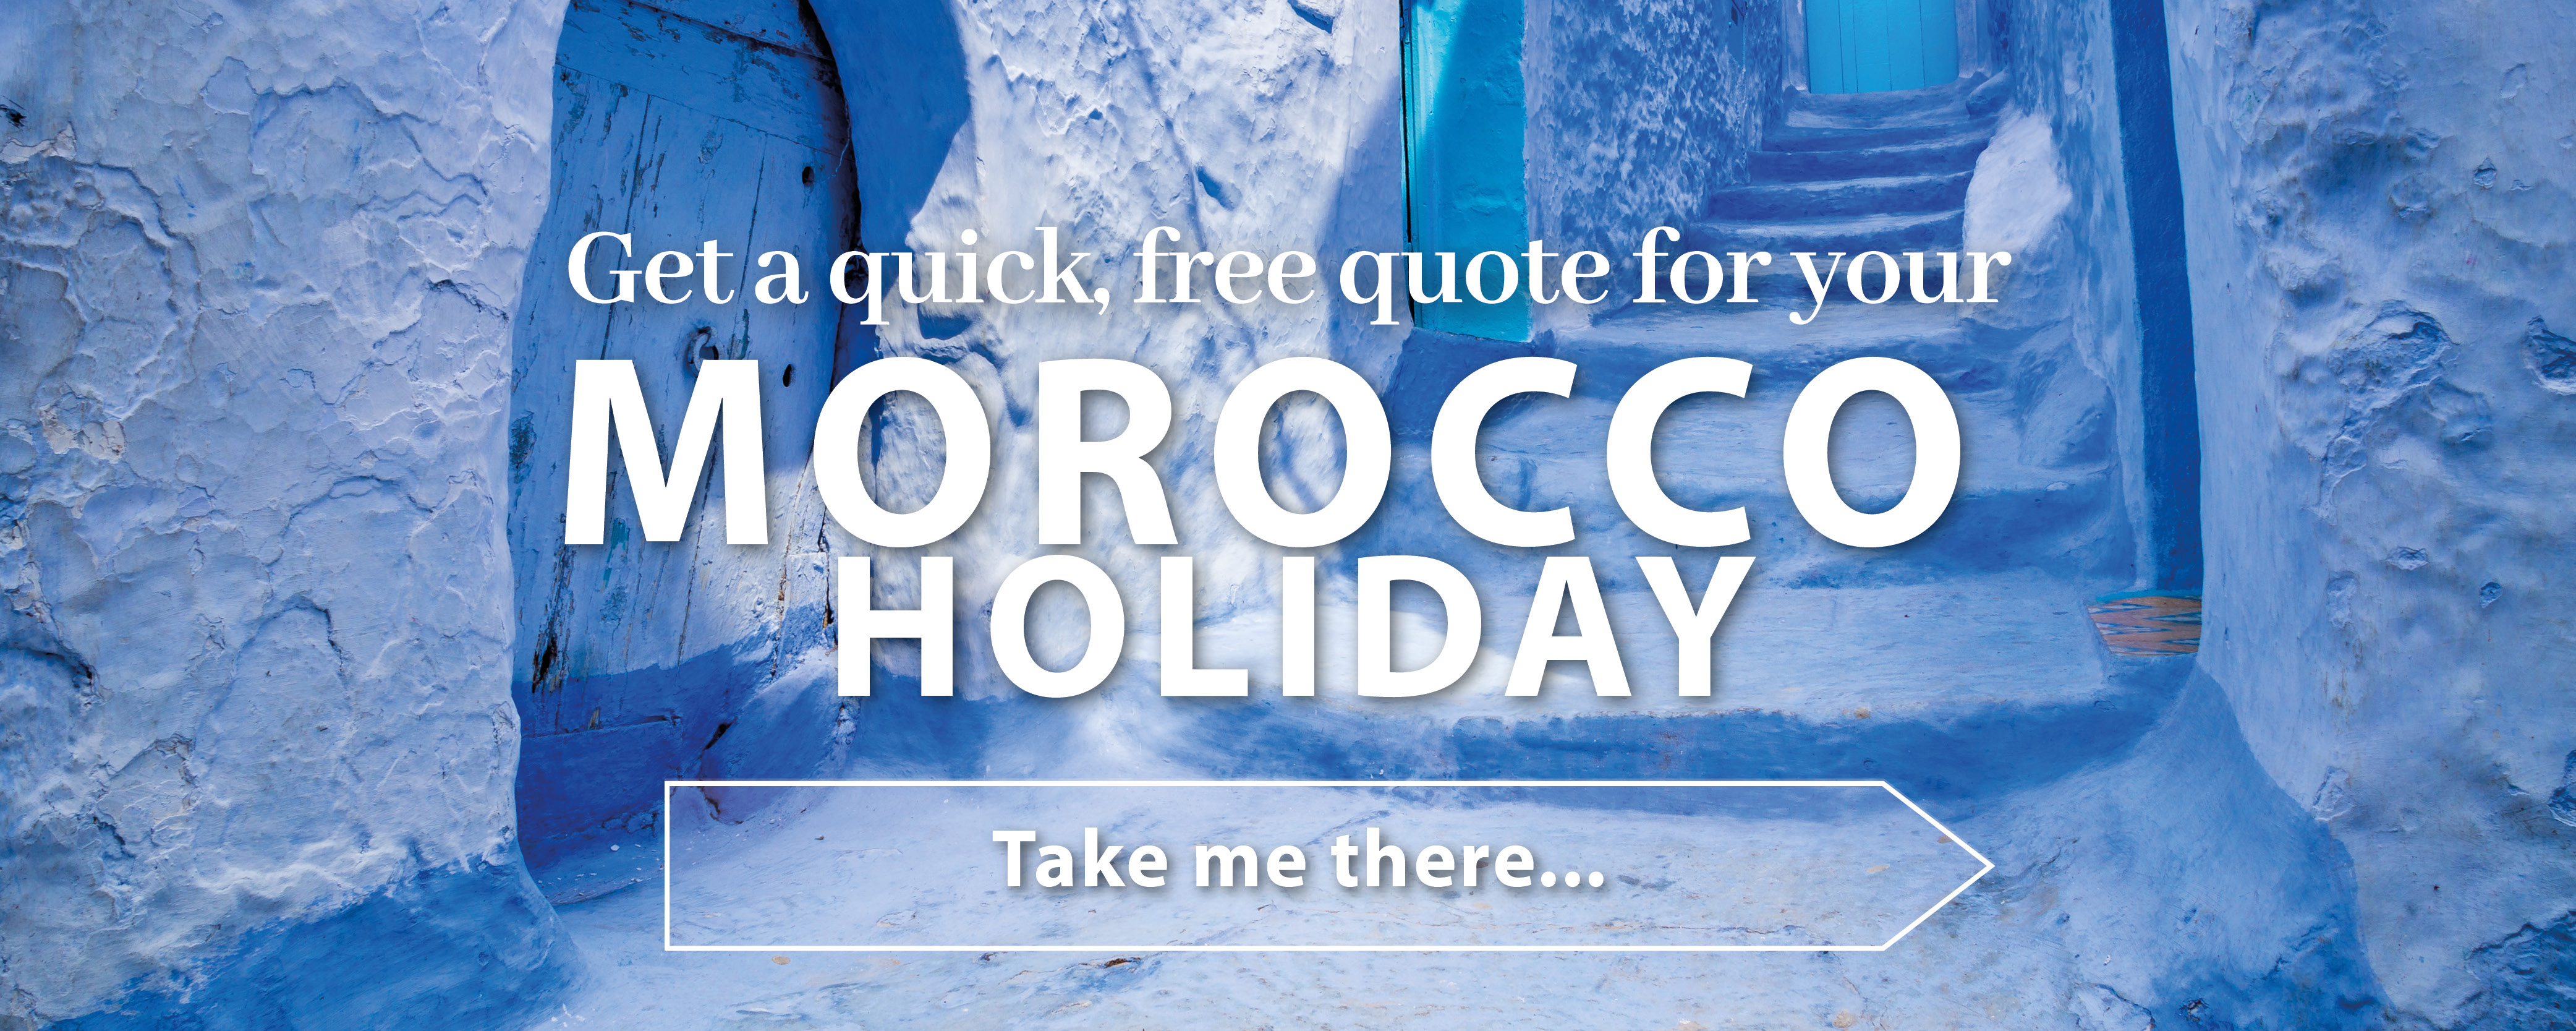 Morocco holiday get a quote